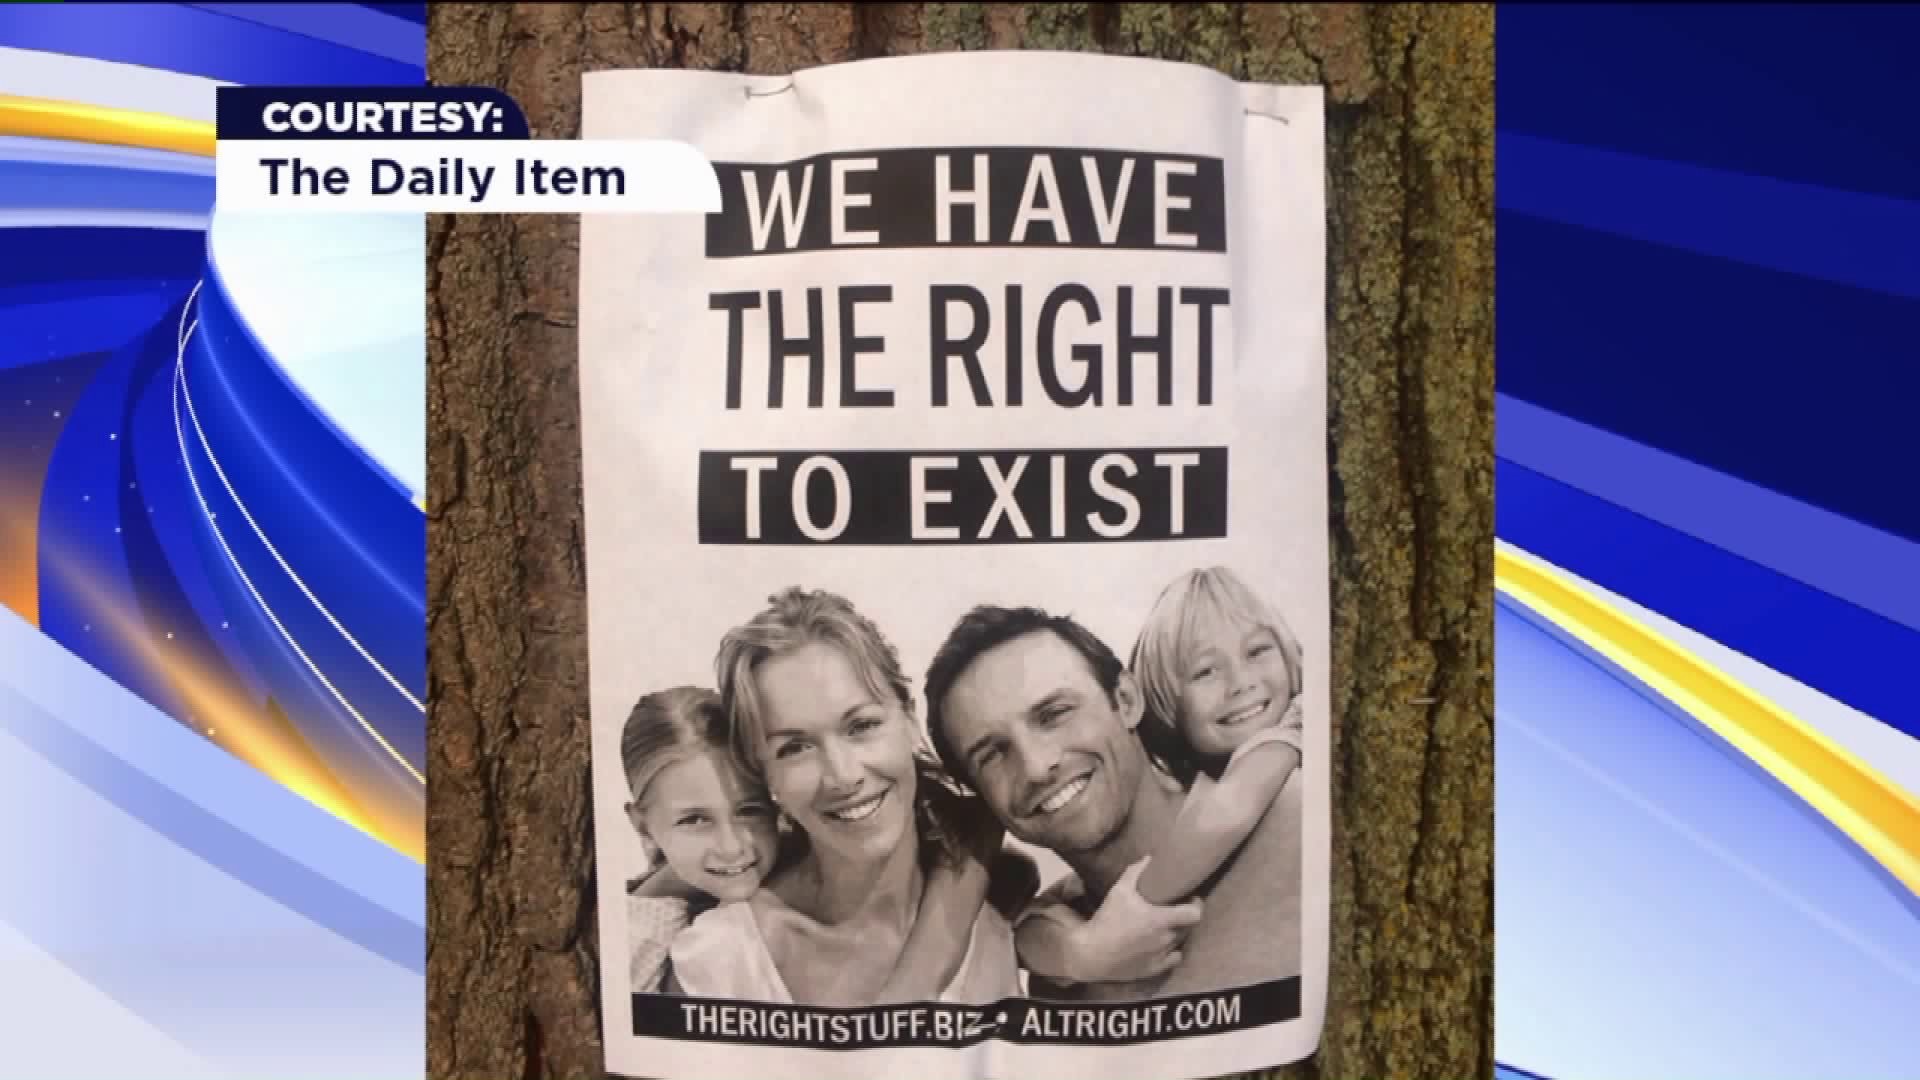 Flyers Promoting 'White Nationalism' Found Posted in Downtown Sunbury